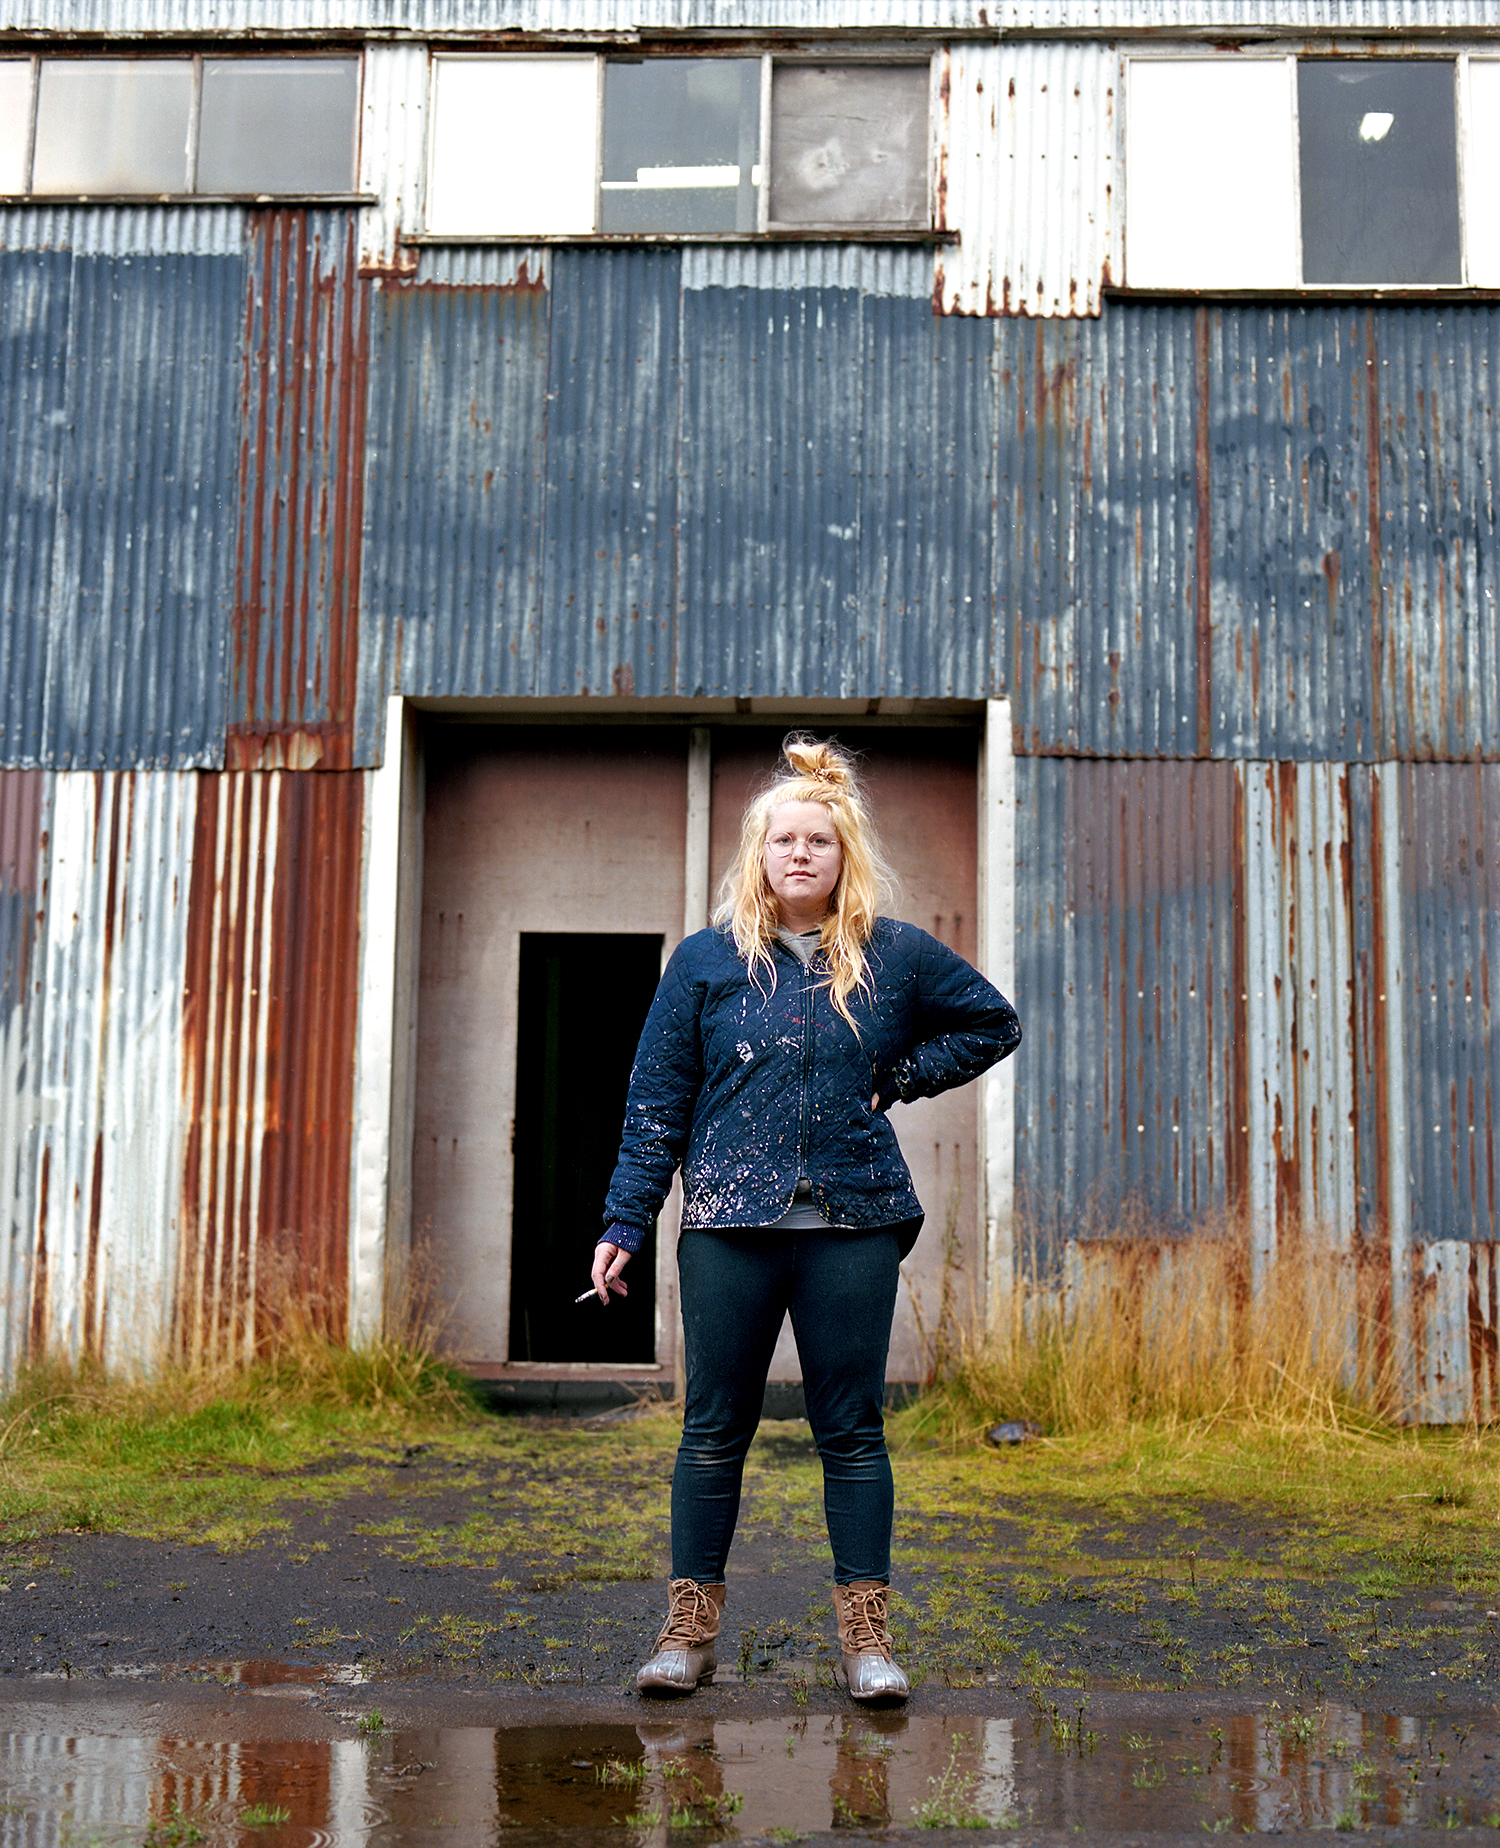  Heidi outside the Fish Factory She is working towards creating an artist residency of her own on her family farm. She is also working towards obtaining a school bus to transform into a traveling residency. This residency would create pop up shows as